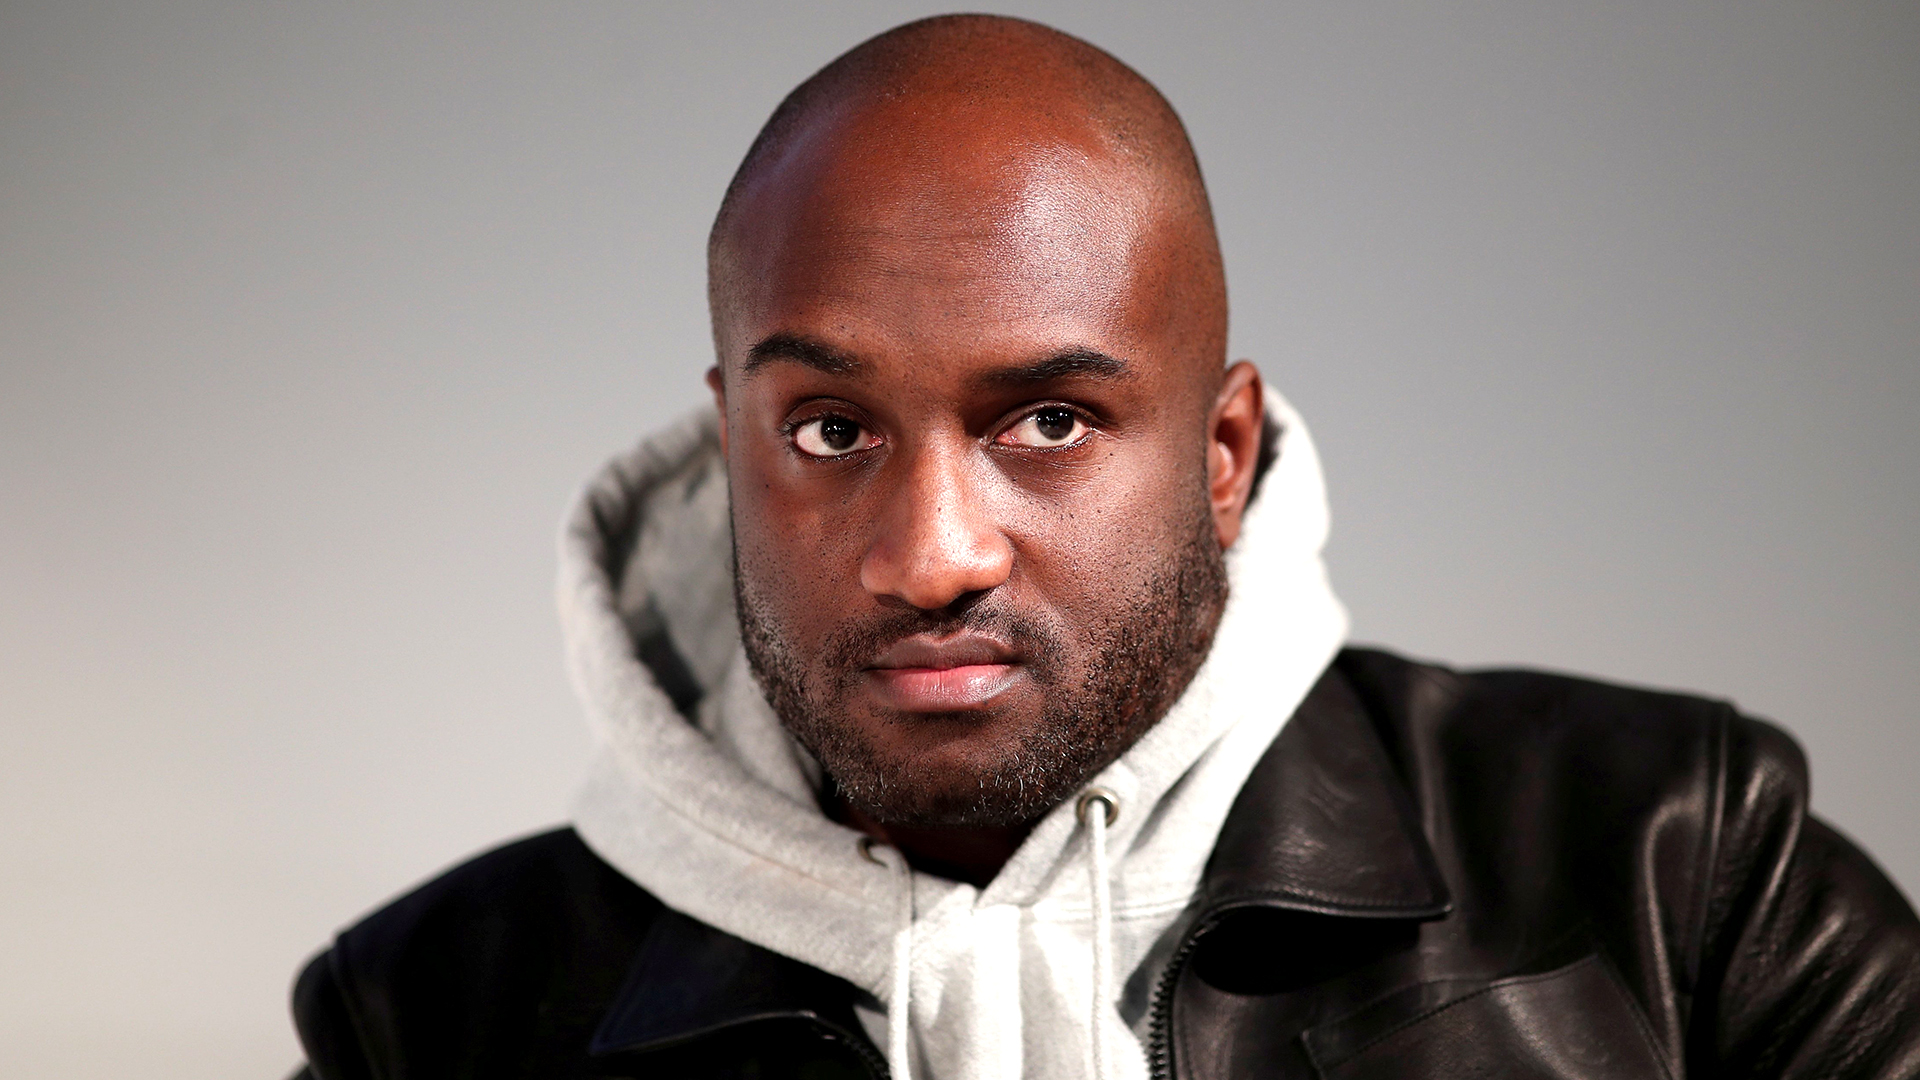 Virgil Abloh to slow down for medical reasons